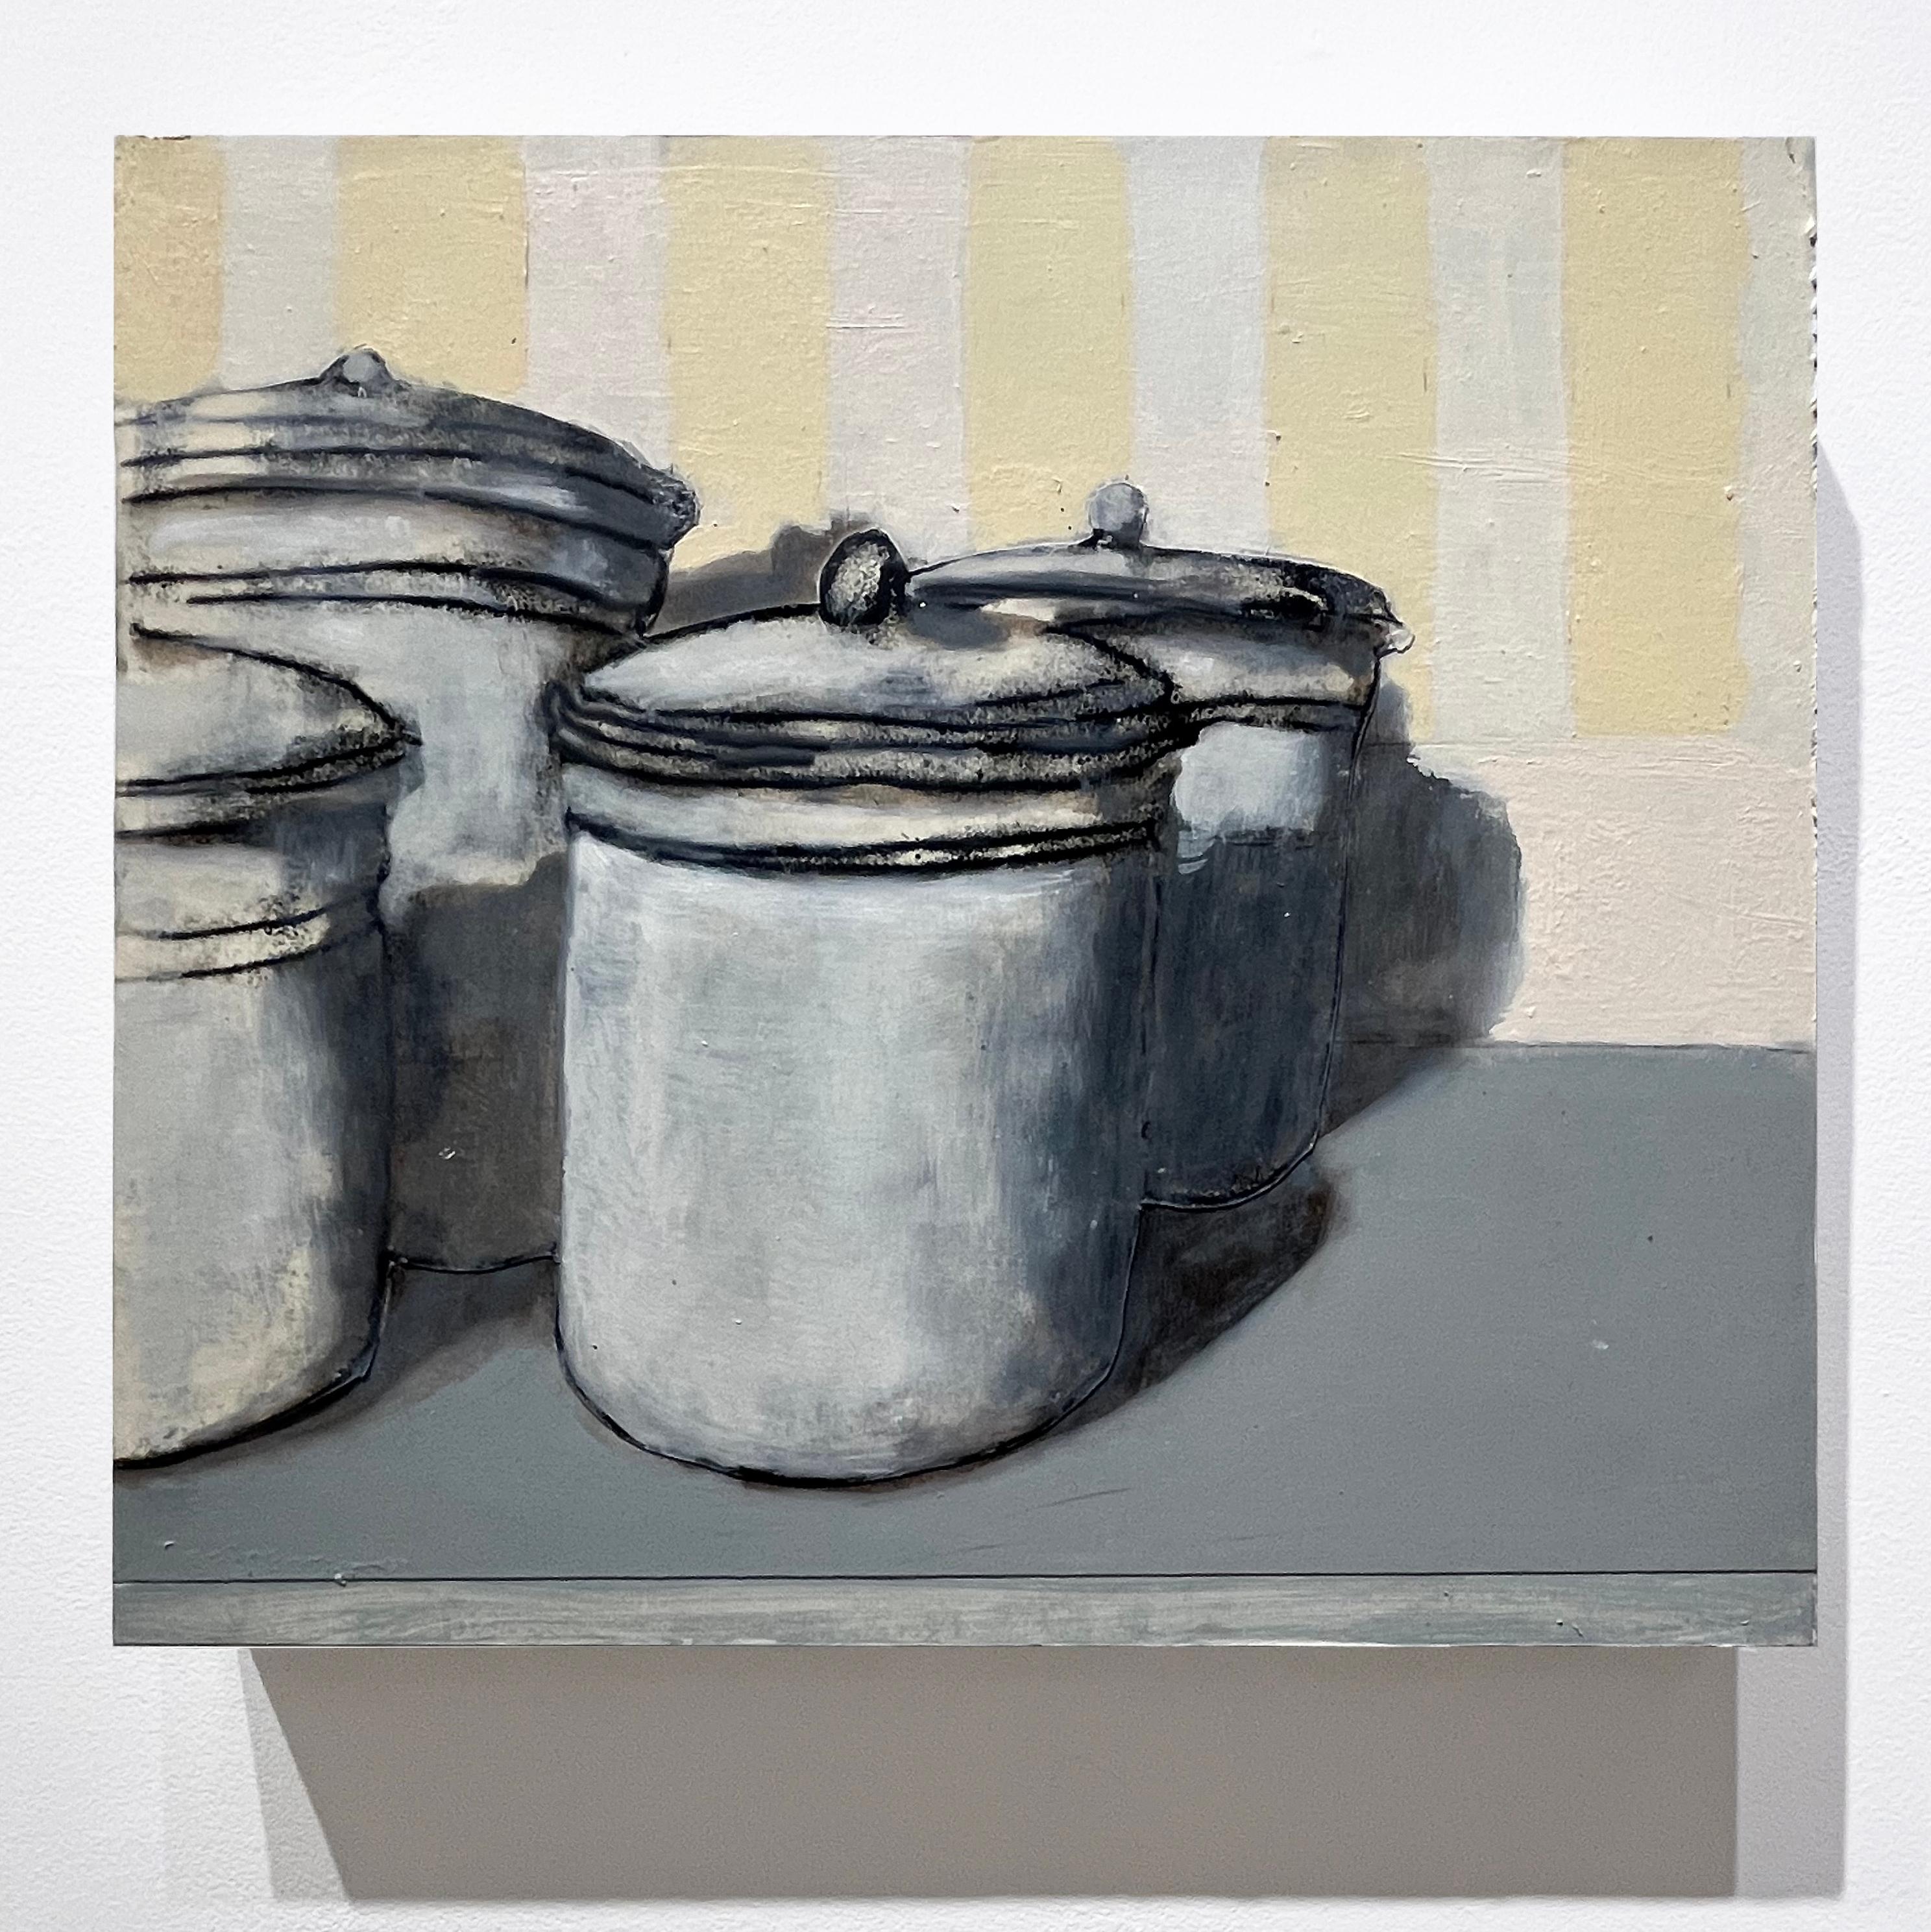 Flour, Sugar, Cornmeal, Tea (Contemporary Still Life Painting of Kitchen Jars)
Contemporary monotype, oil and collage still-life painting on panel of a collection of storage tins set on a yellow and white striped background.
David Konigsberg
Flour,